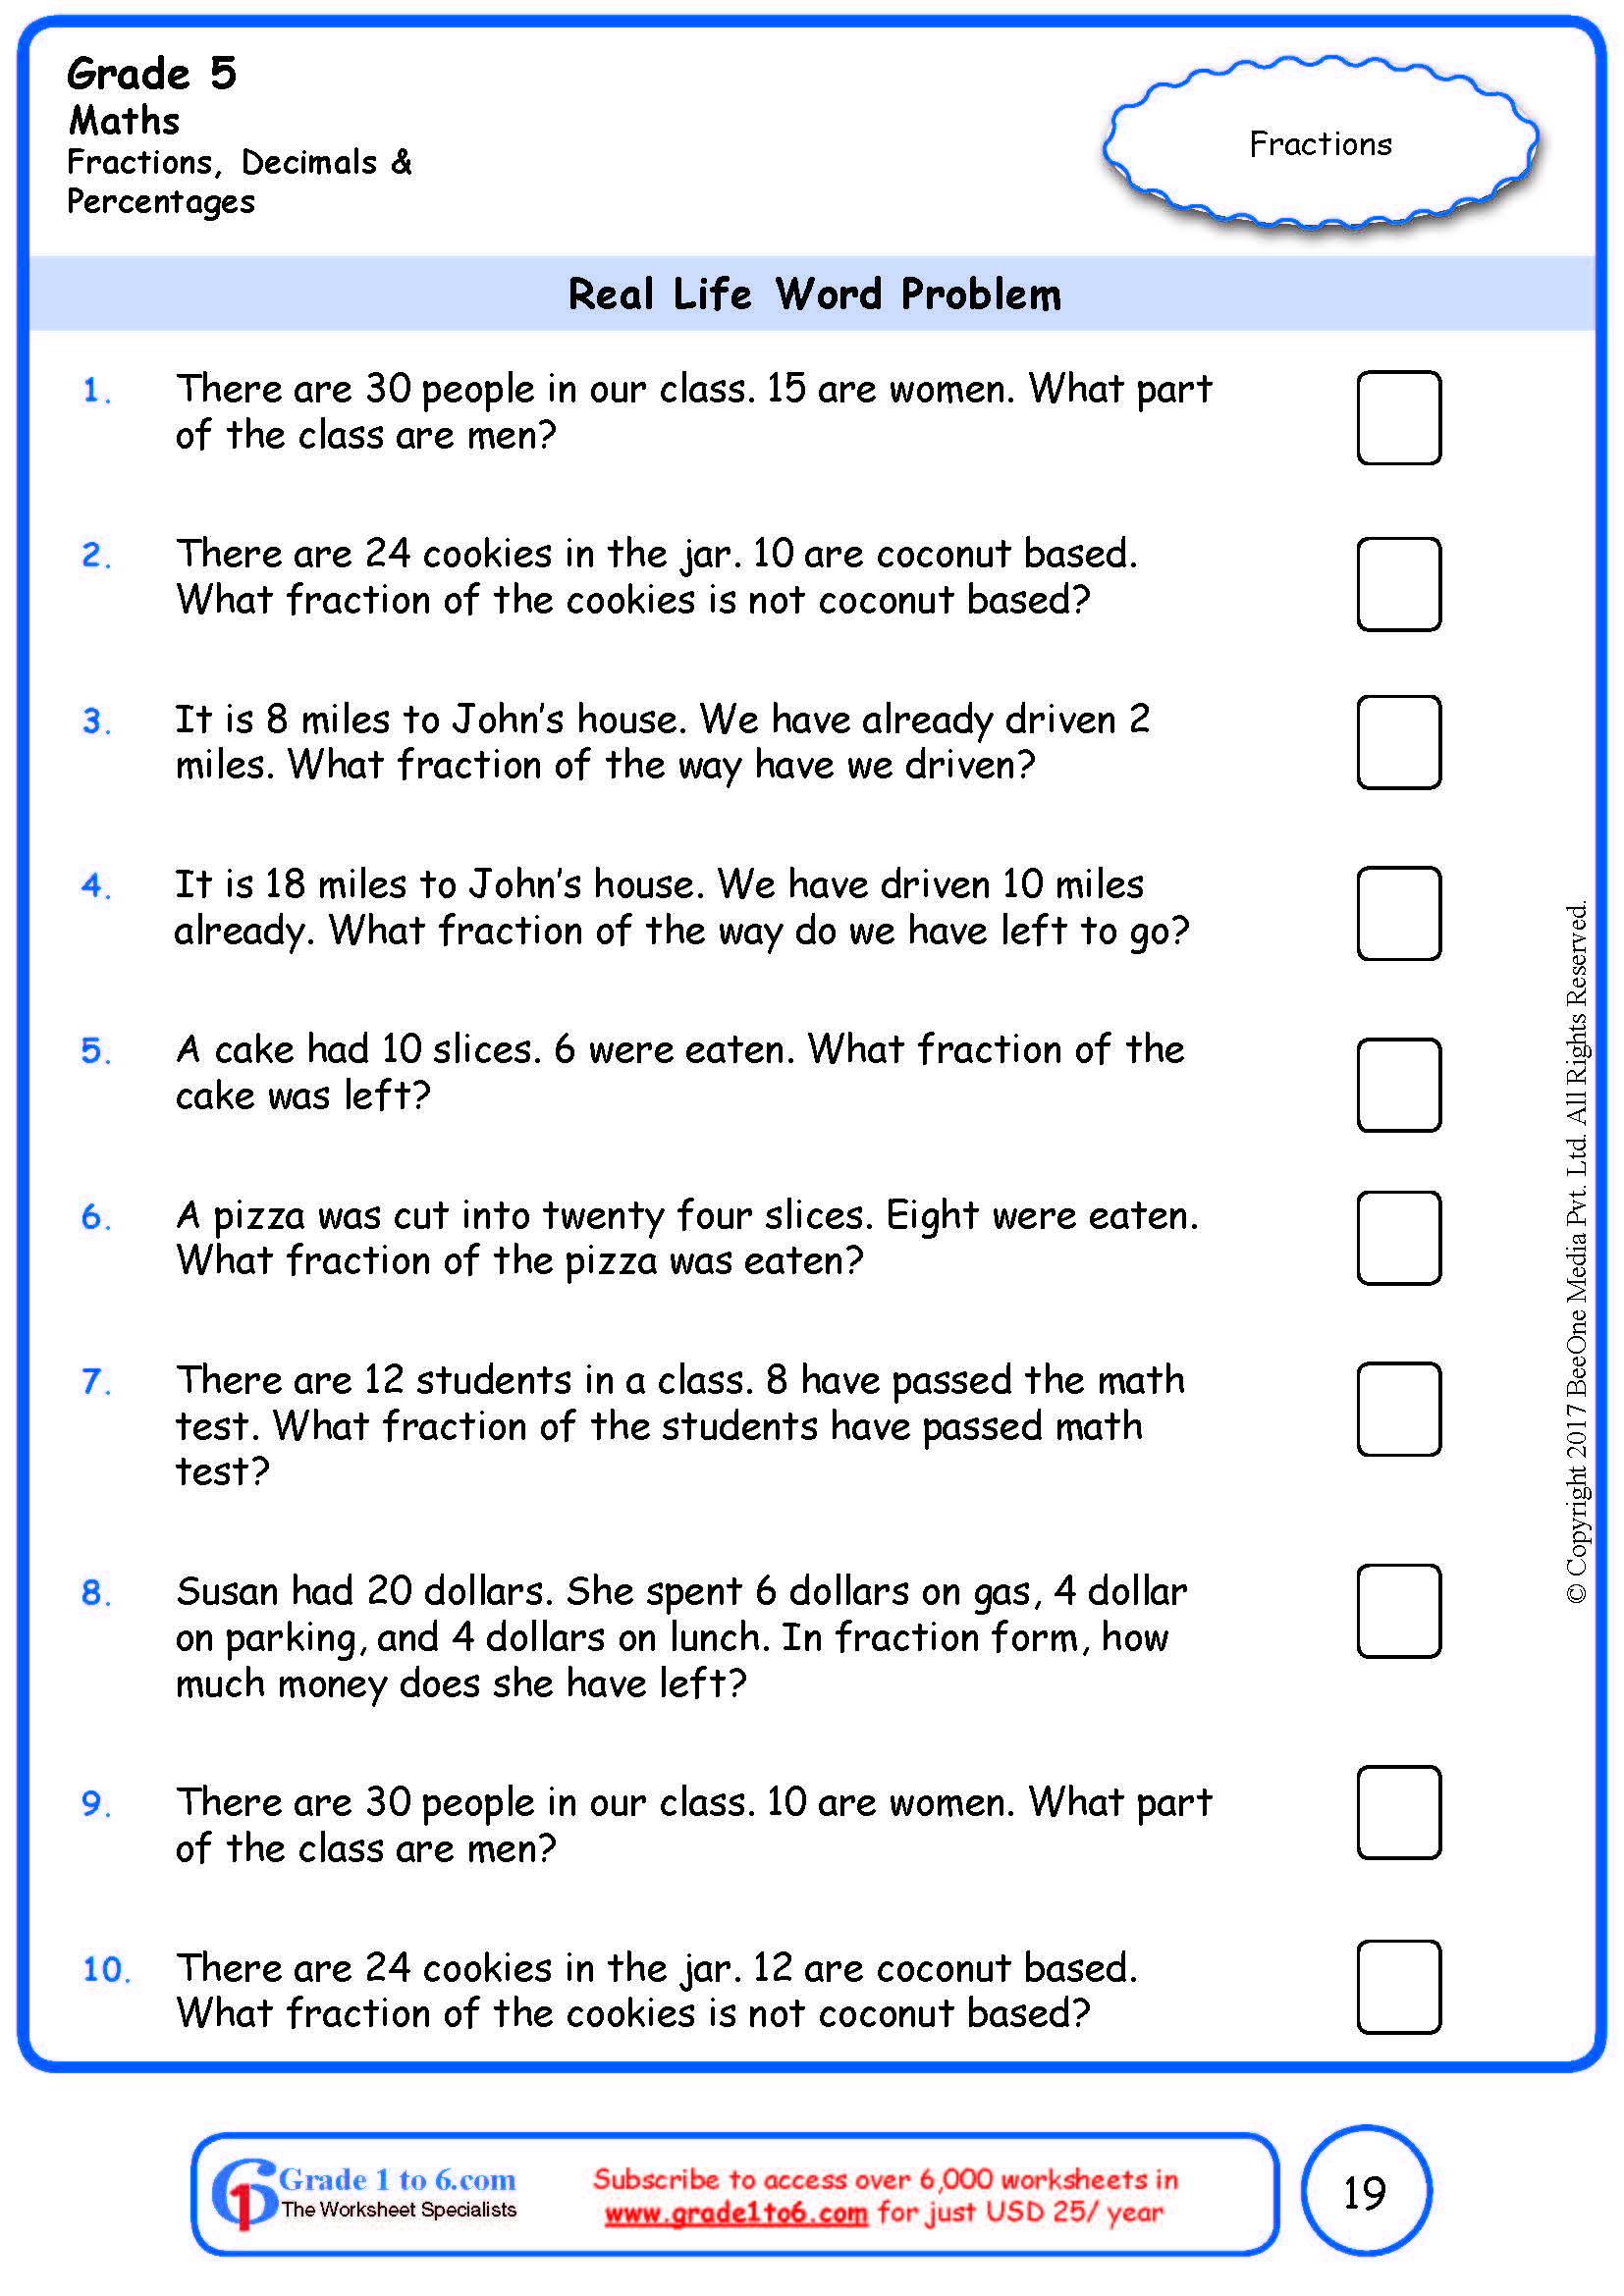 grade-5-word-problems-in-fractions-worksheets-www-grade1to6